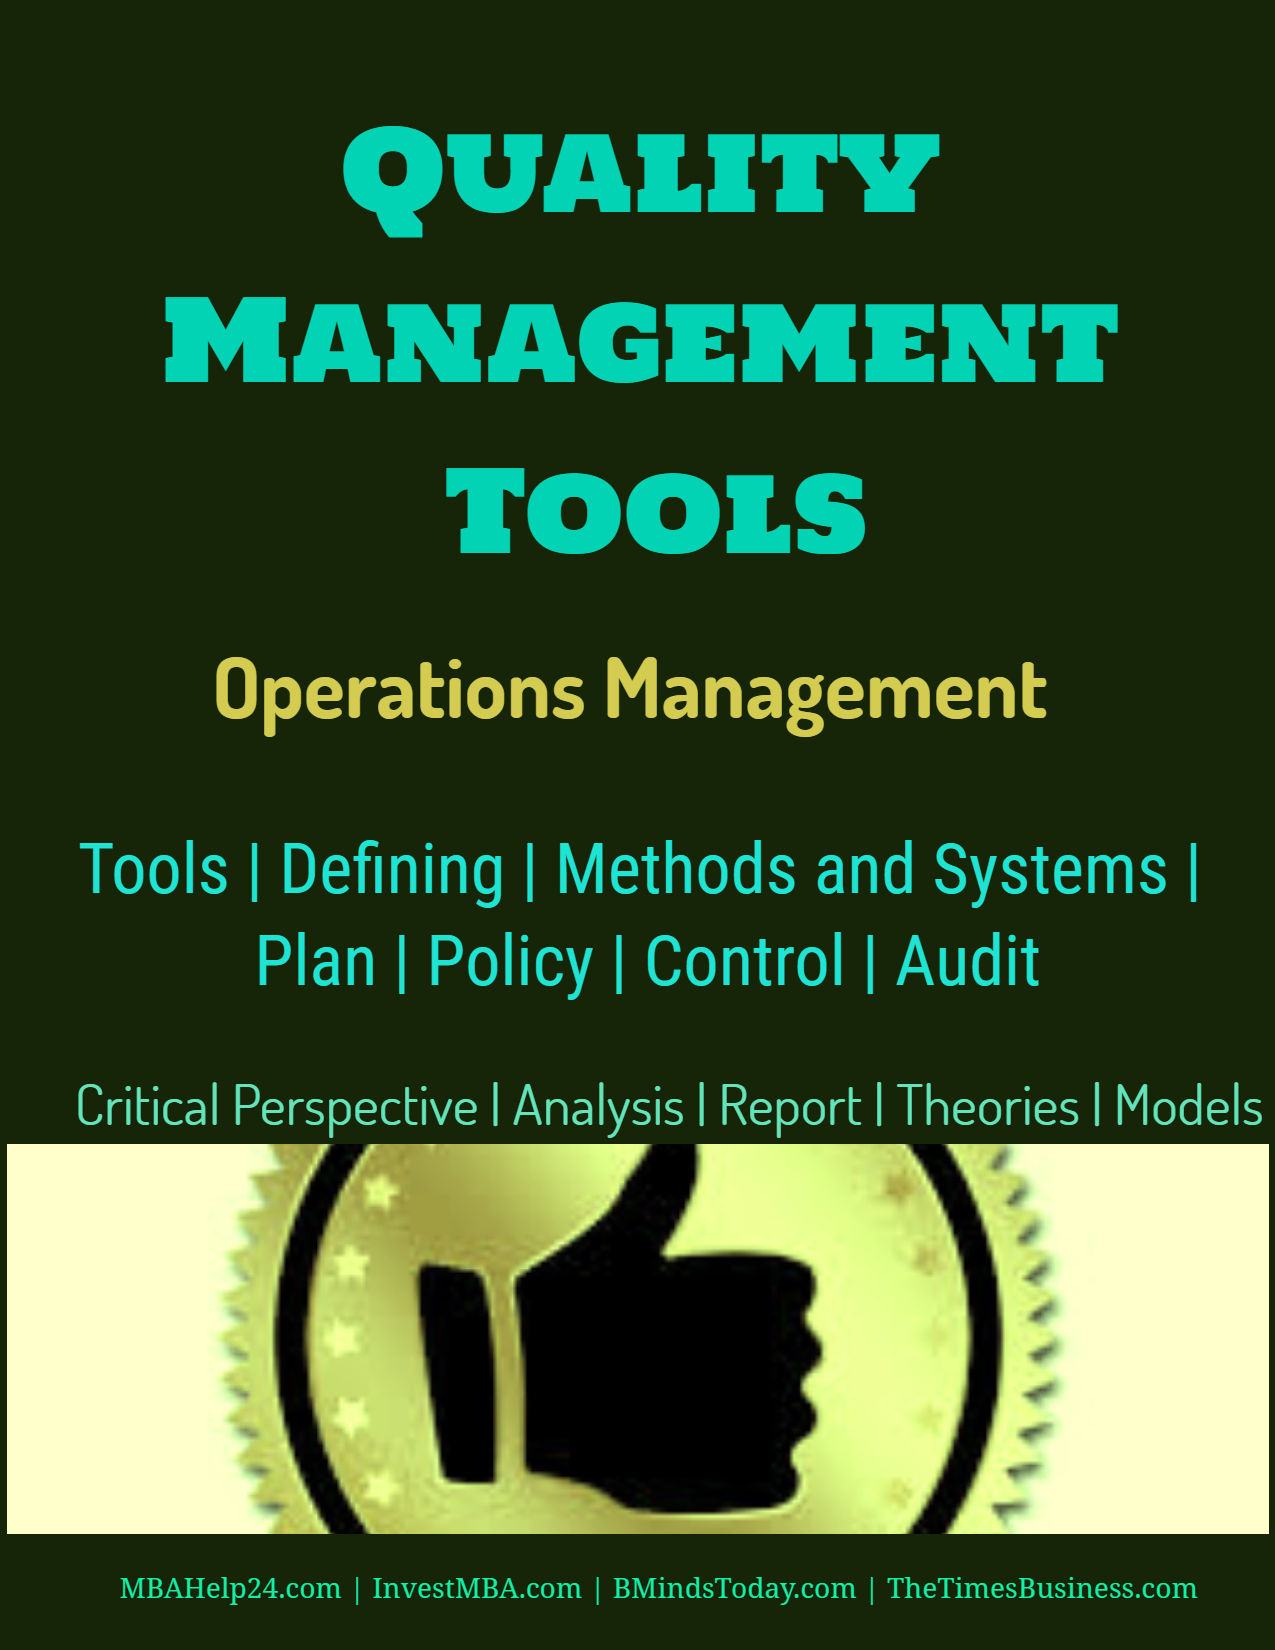 Total quality management tools quality management Quality Management Tools | Methods and Systems | Plan | Control | Audit Total quality management tools